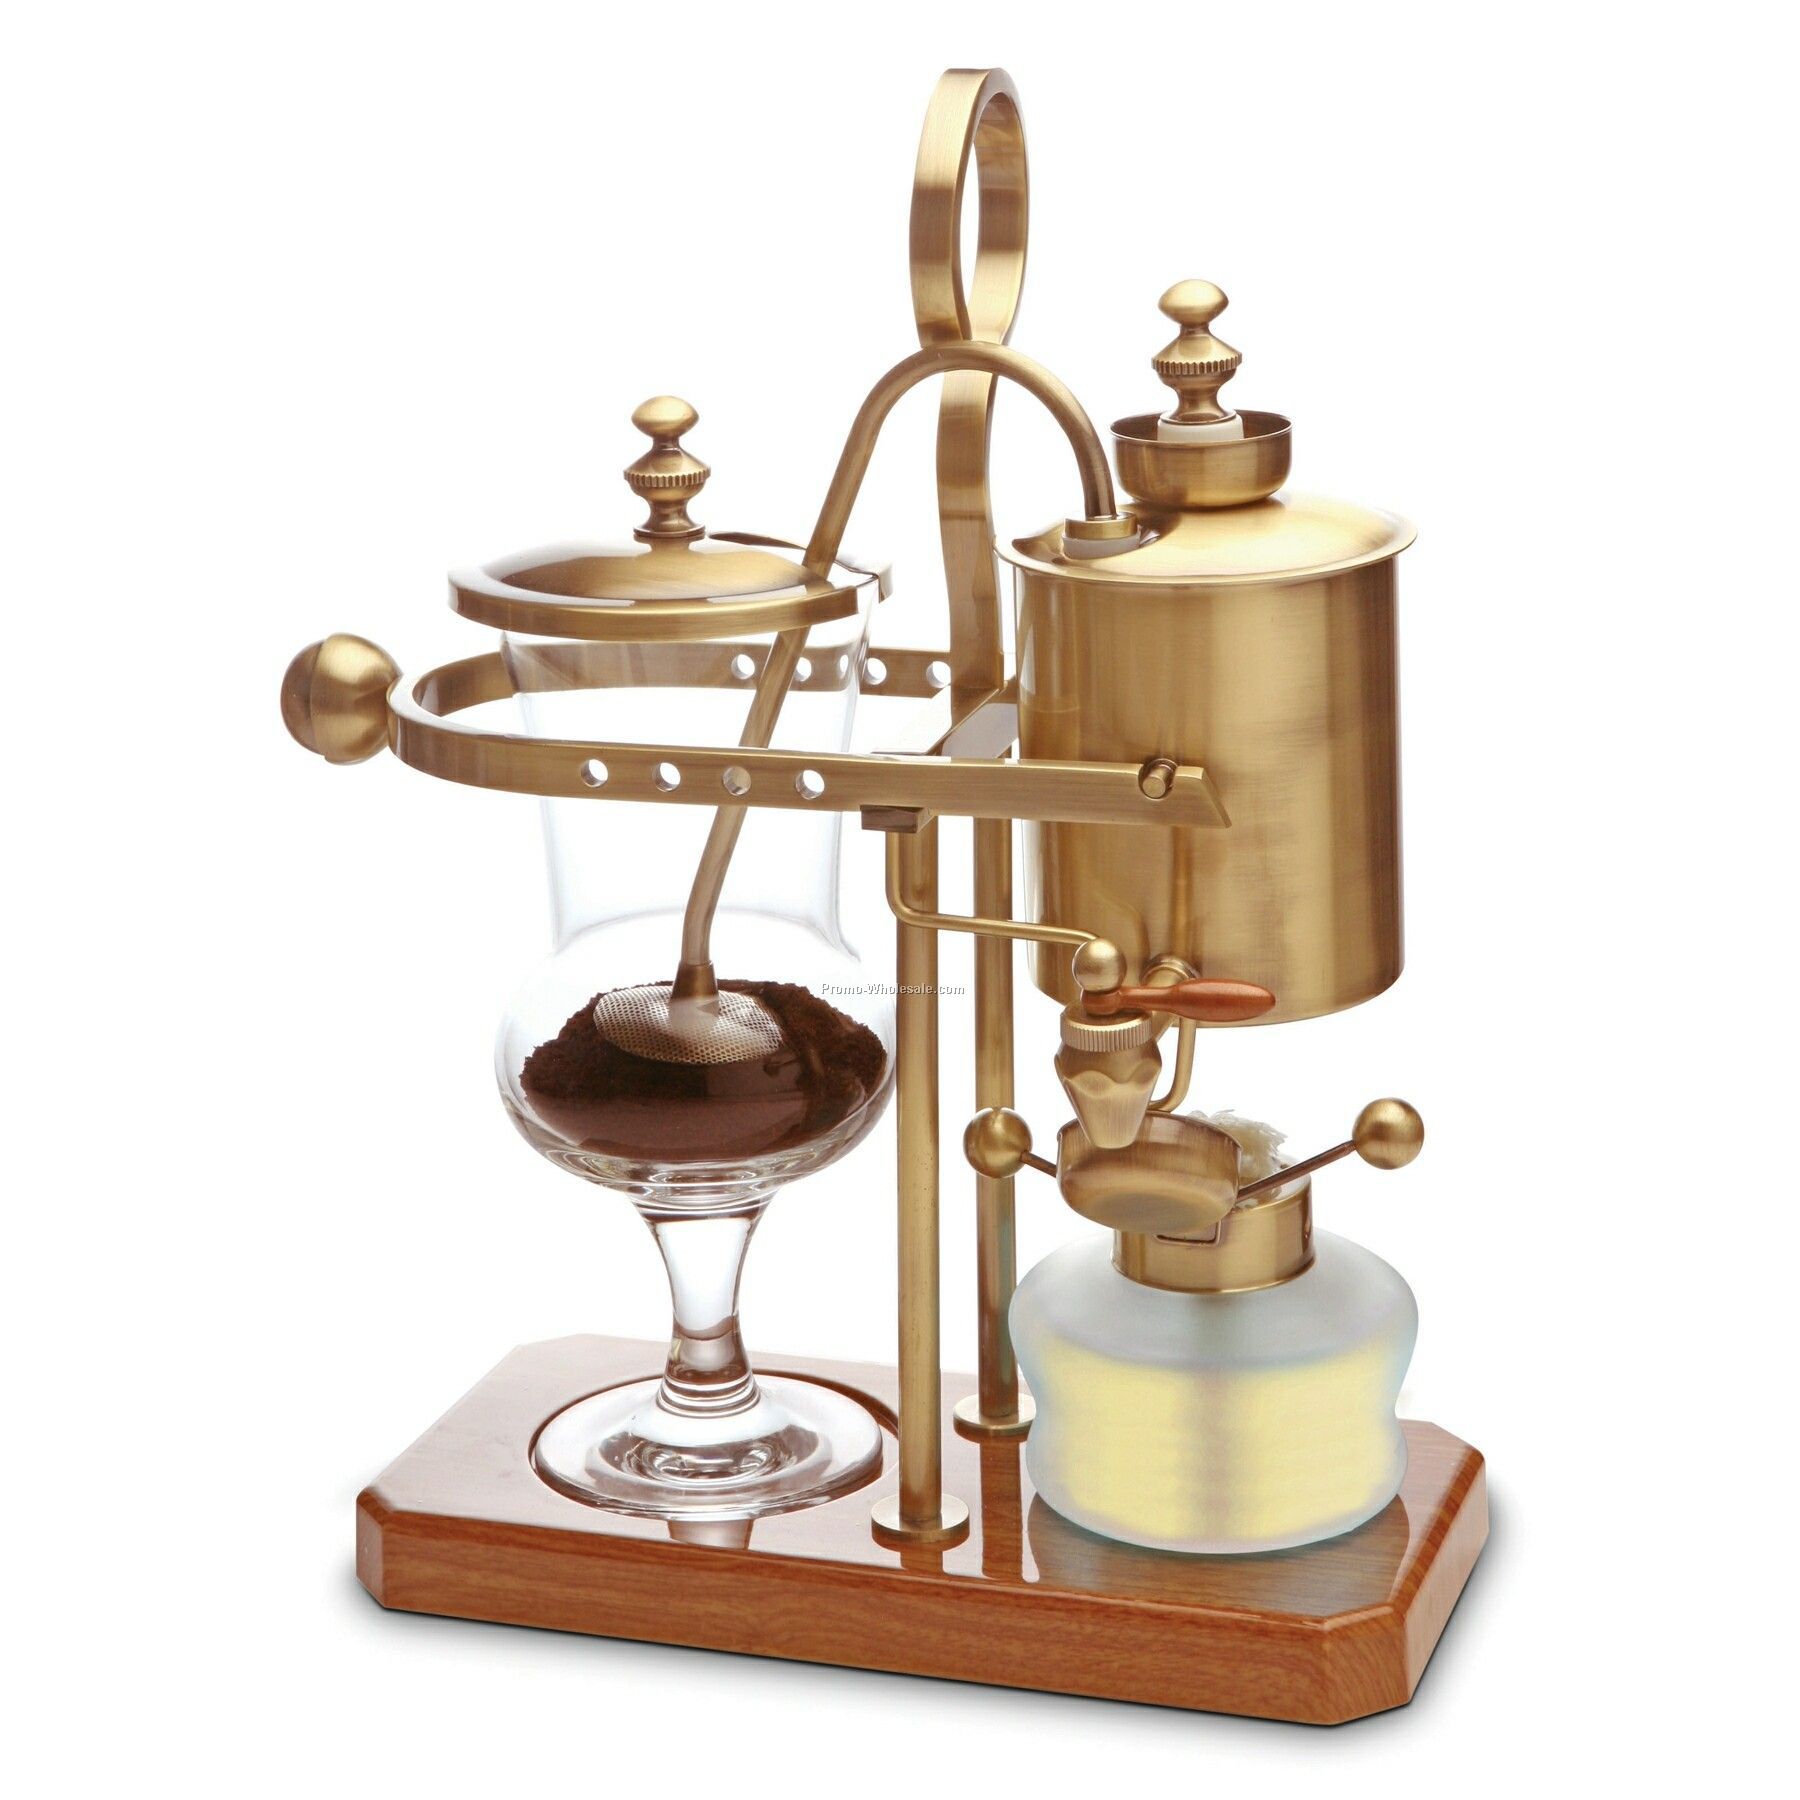 New Orleans Coffee Maker